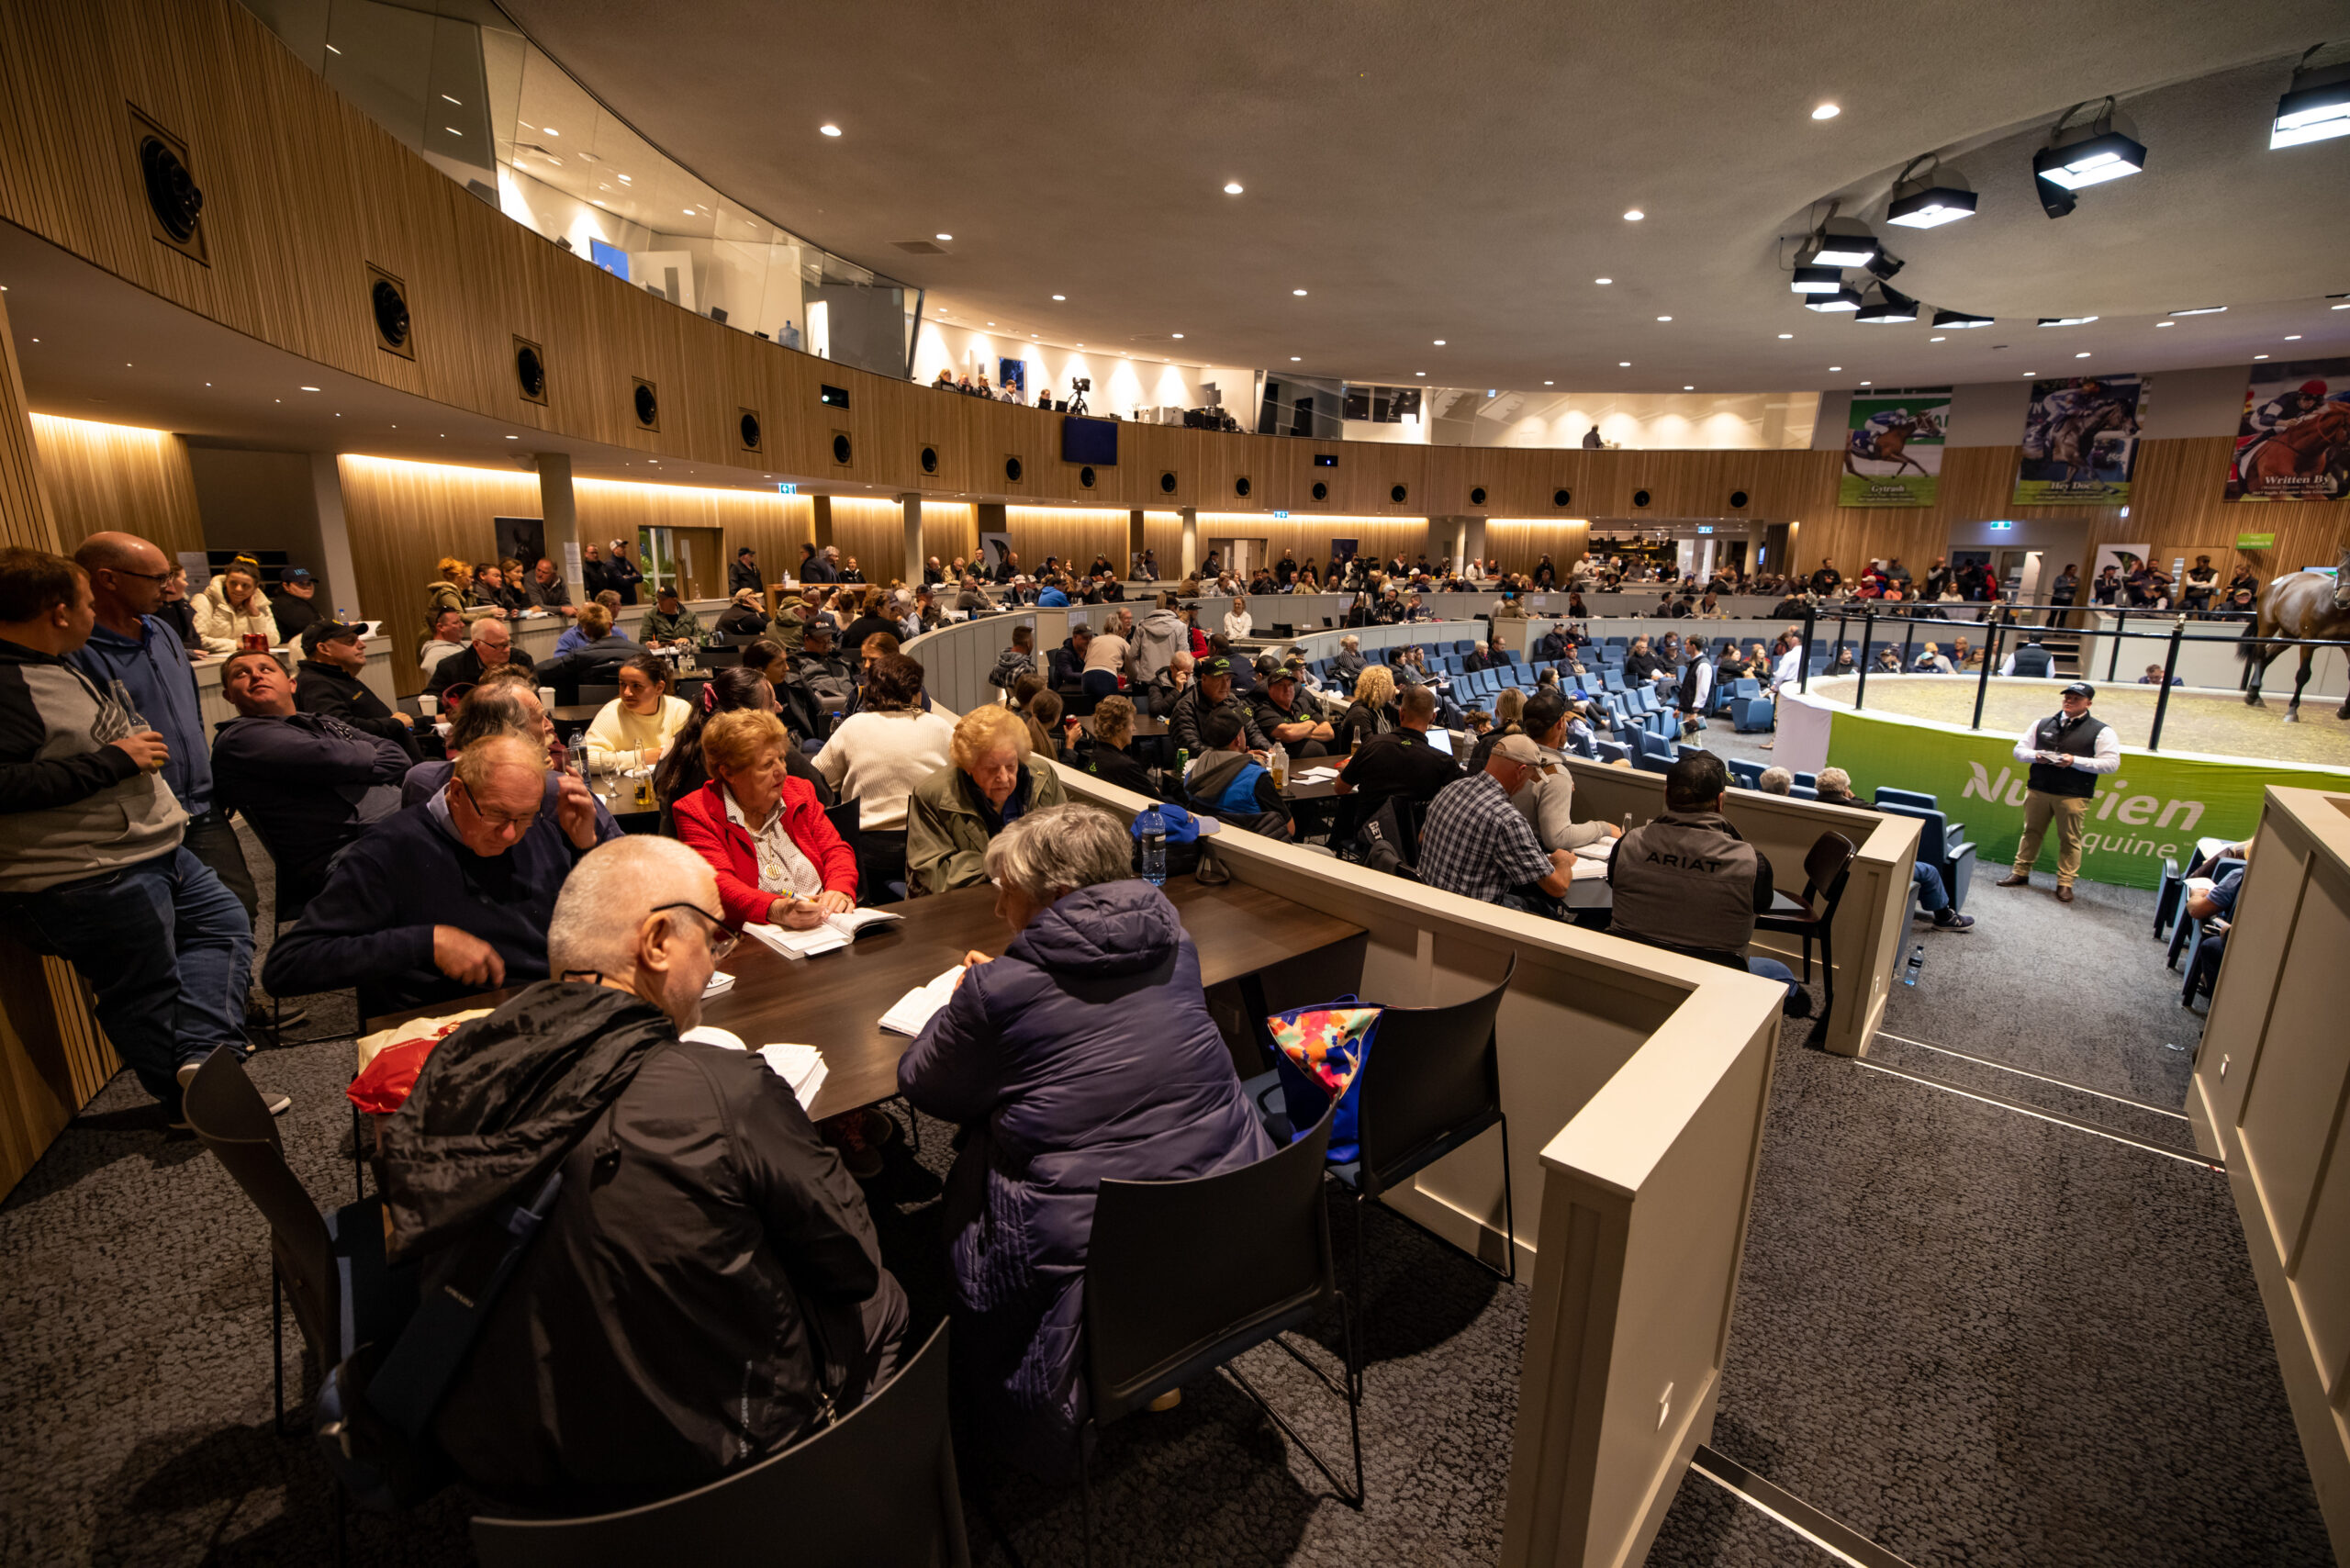 Pedigree preview updates for the 2022 Nutrien Equine Yearling Sales